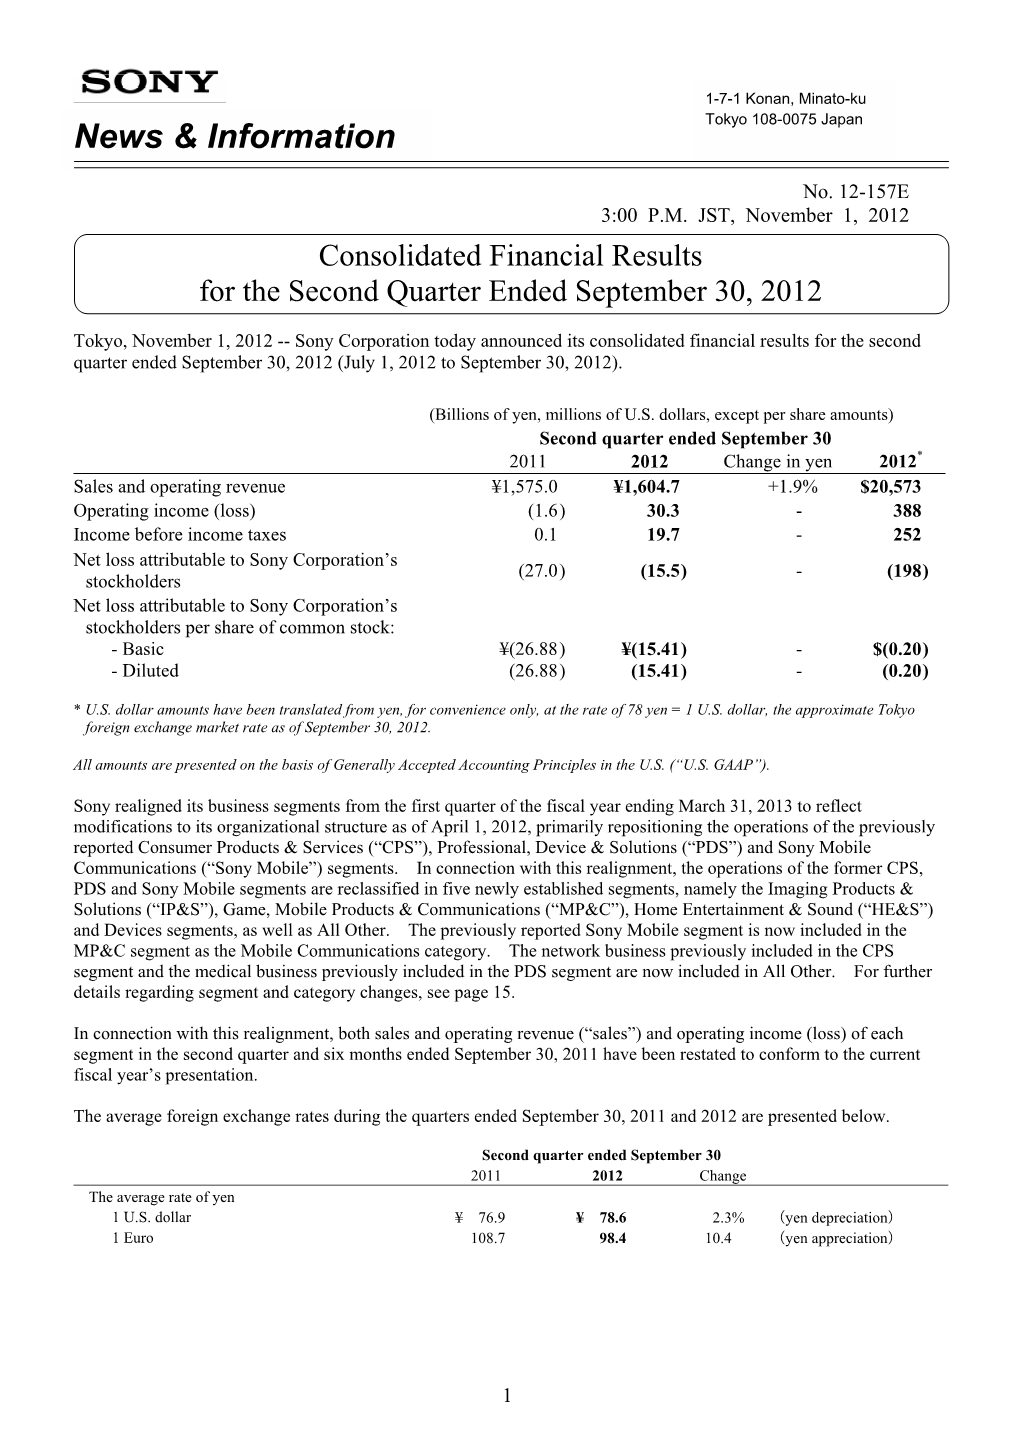 Consolidated Financial Results for the Second Quarter Ended September 30, 2012